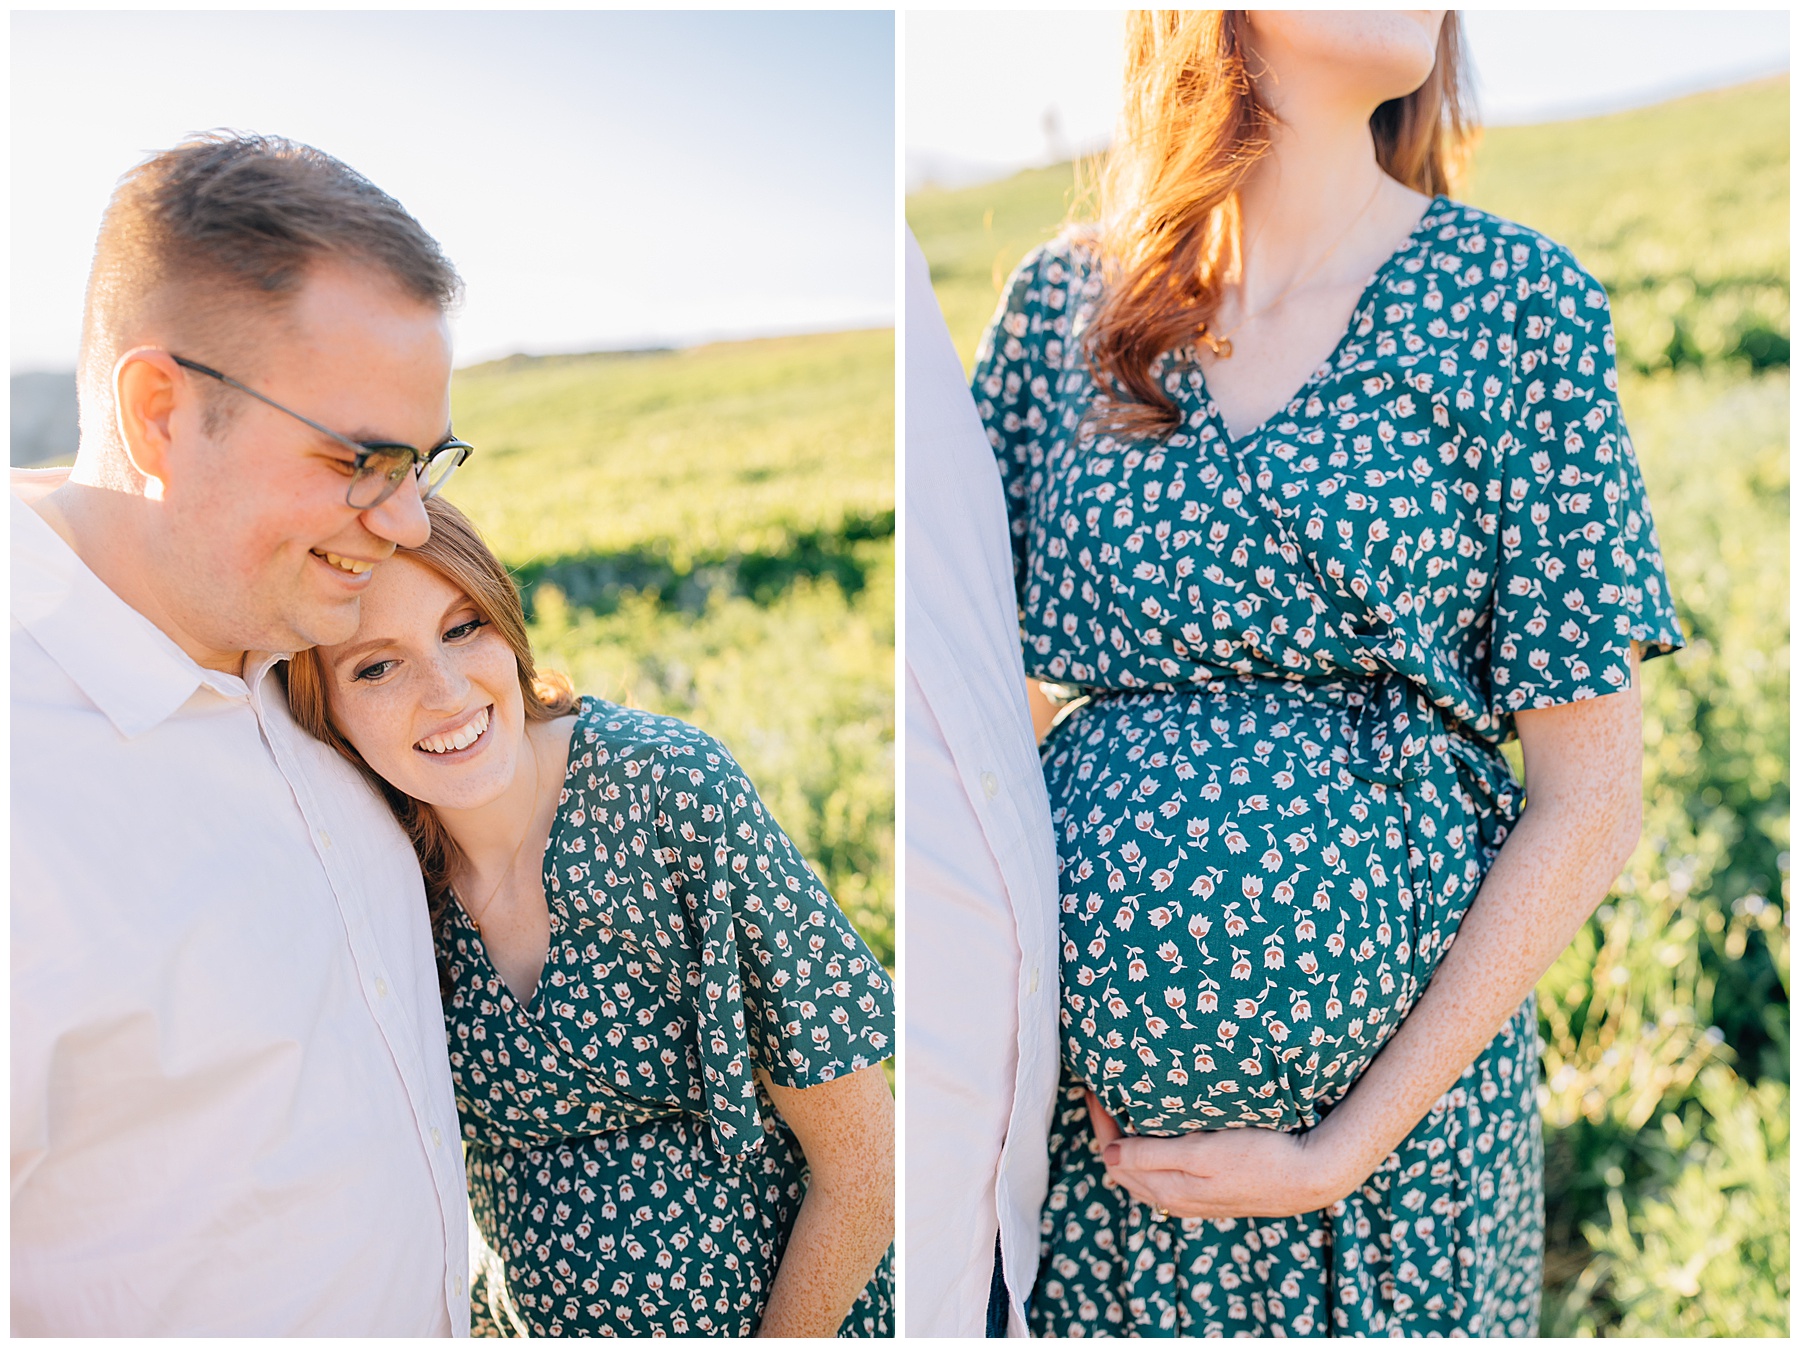 Peart | Albion Basin Maternity Session